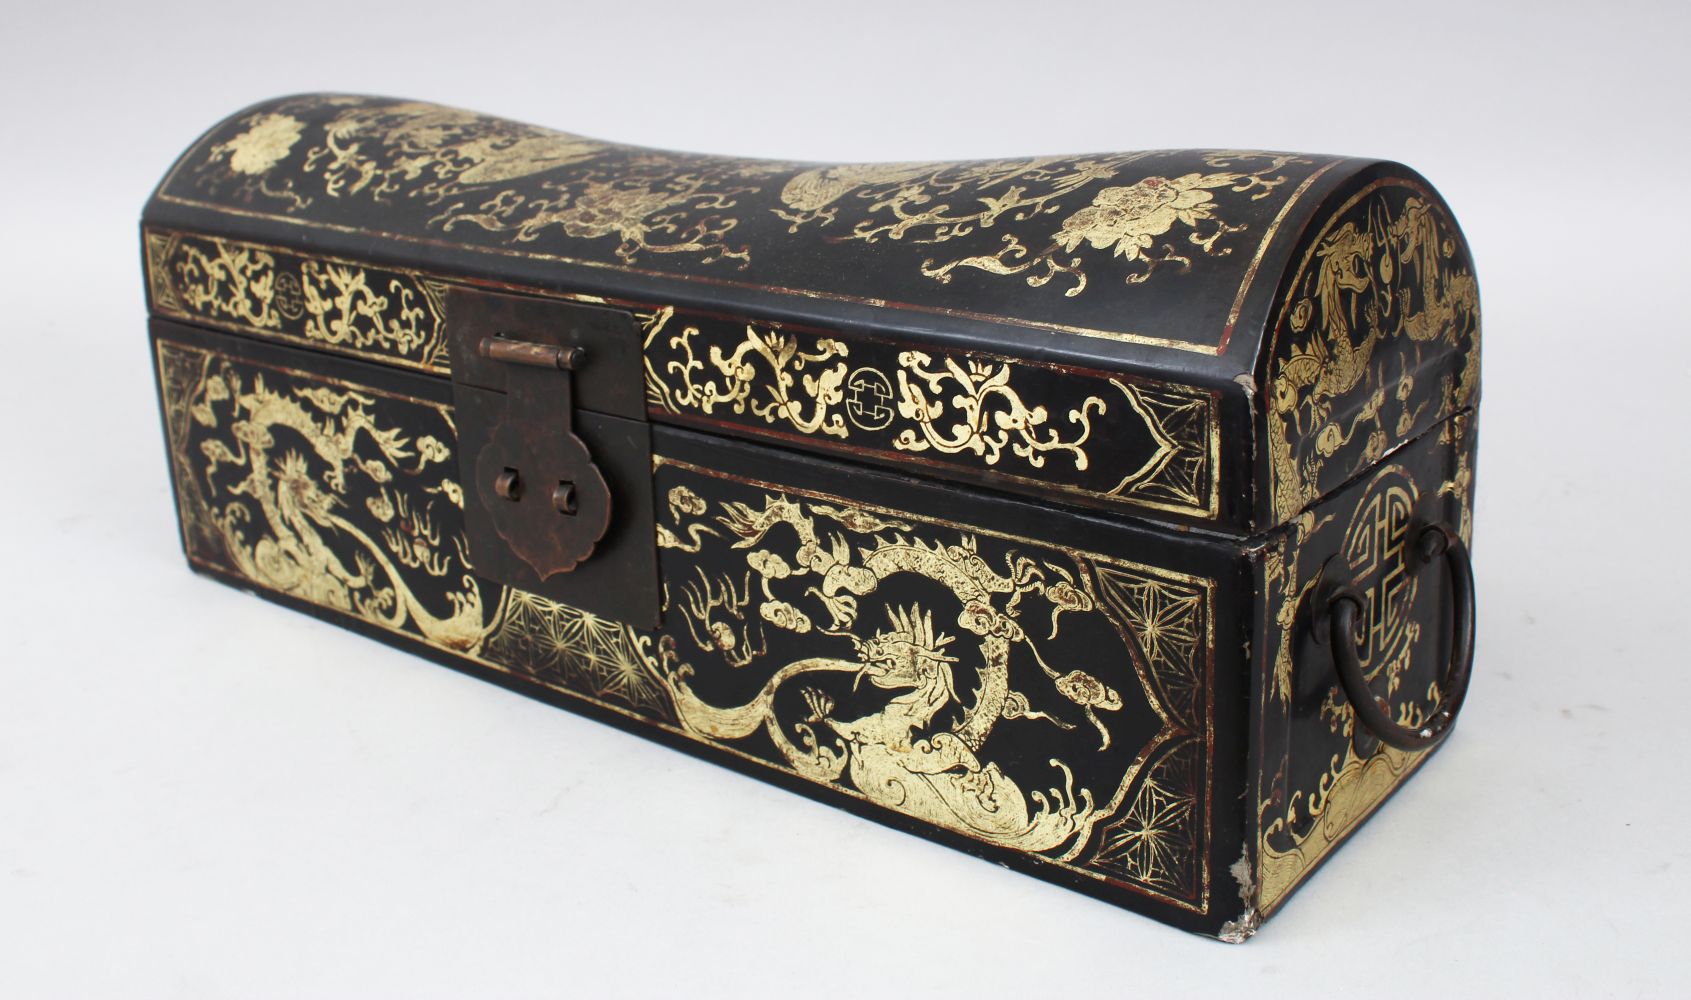 A GOOD 19TH CENTURY CHINESE LACQUER CHEST / BOX, the lacquer box with gilded decoration of dragons - Image 2 of 12